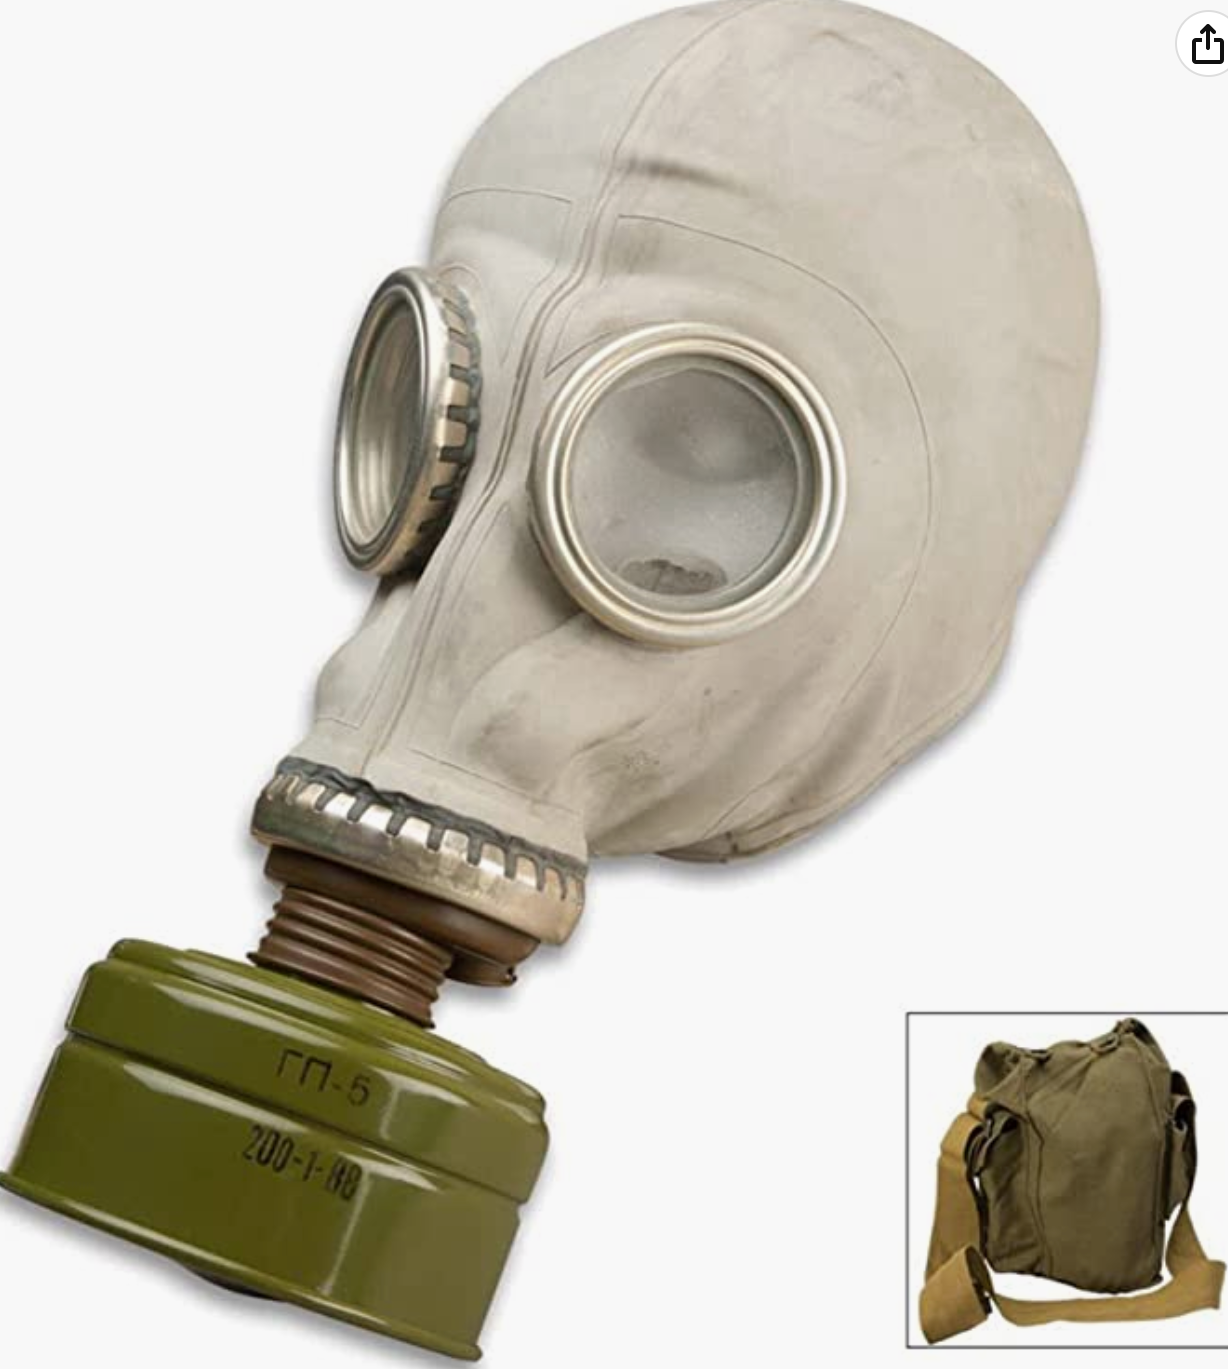 ADULT RUSSIAN GP5 GAS MASK